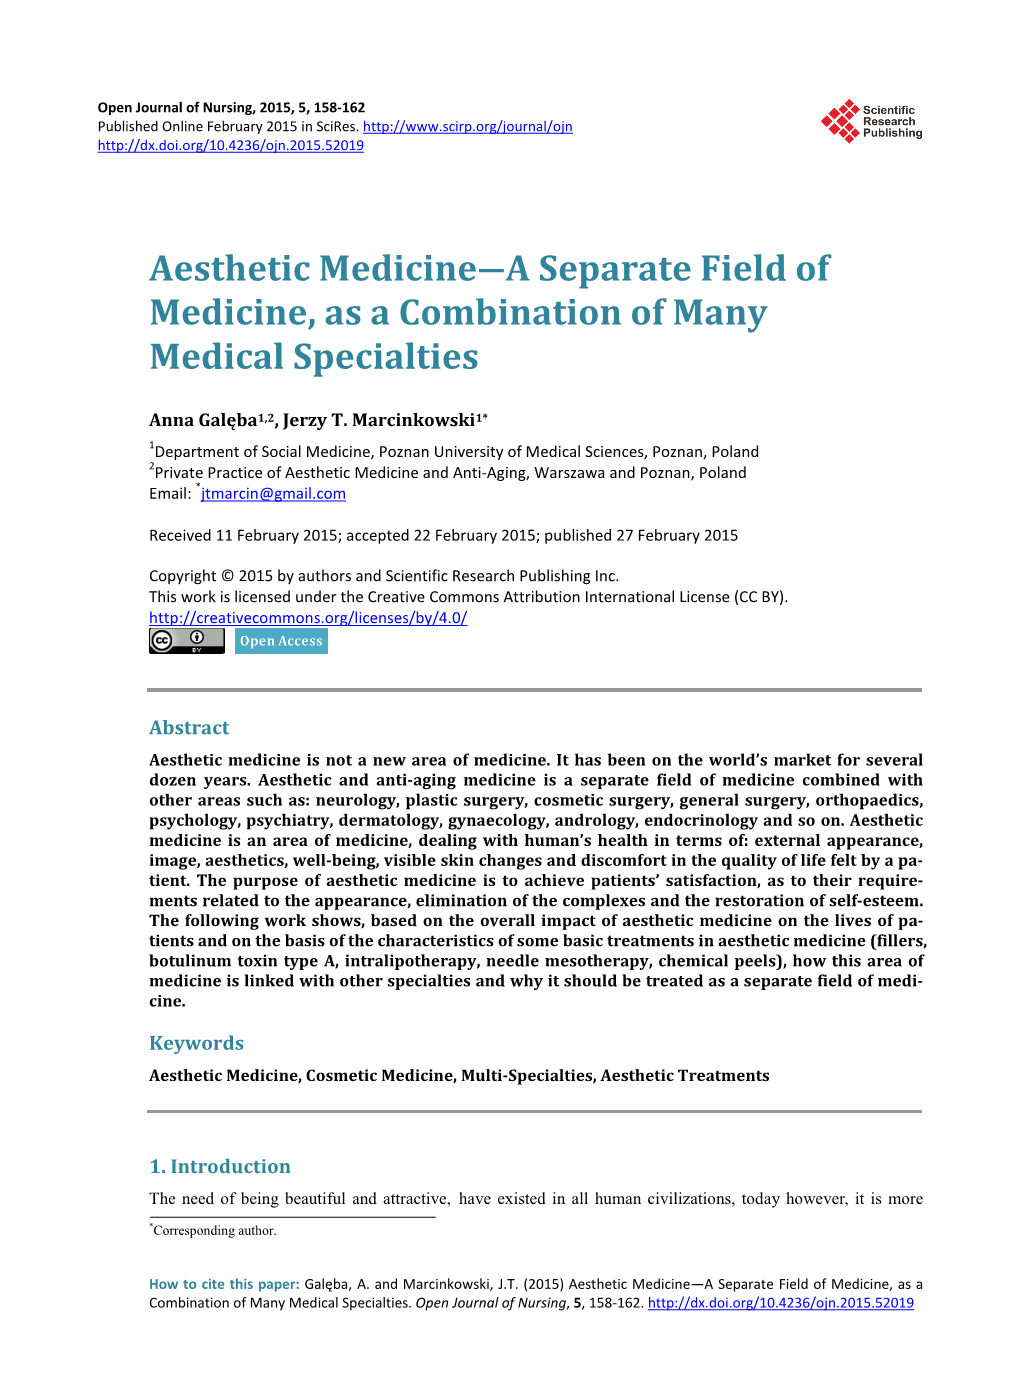 Aesthetic Medicine―A Separate Field of Medicine, As a Combination of Many Medical Specialties